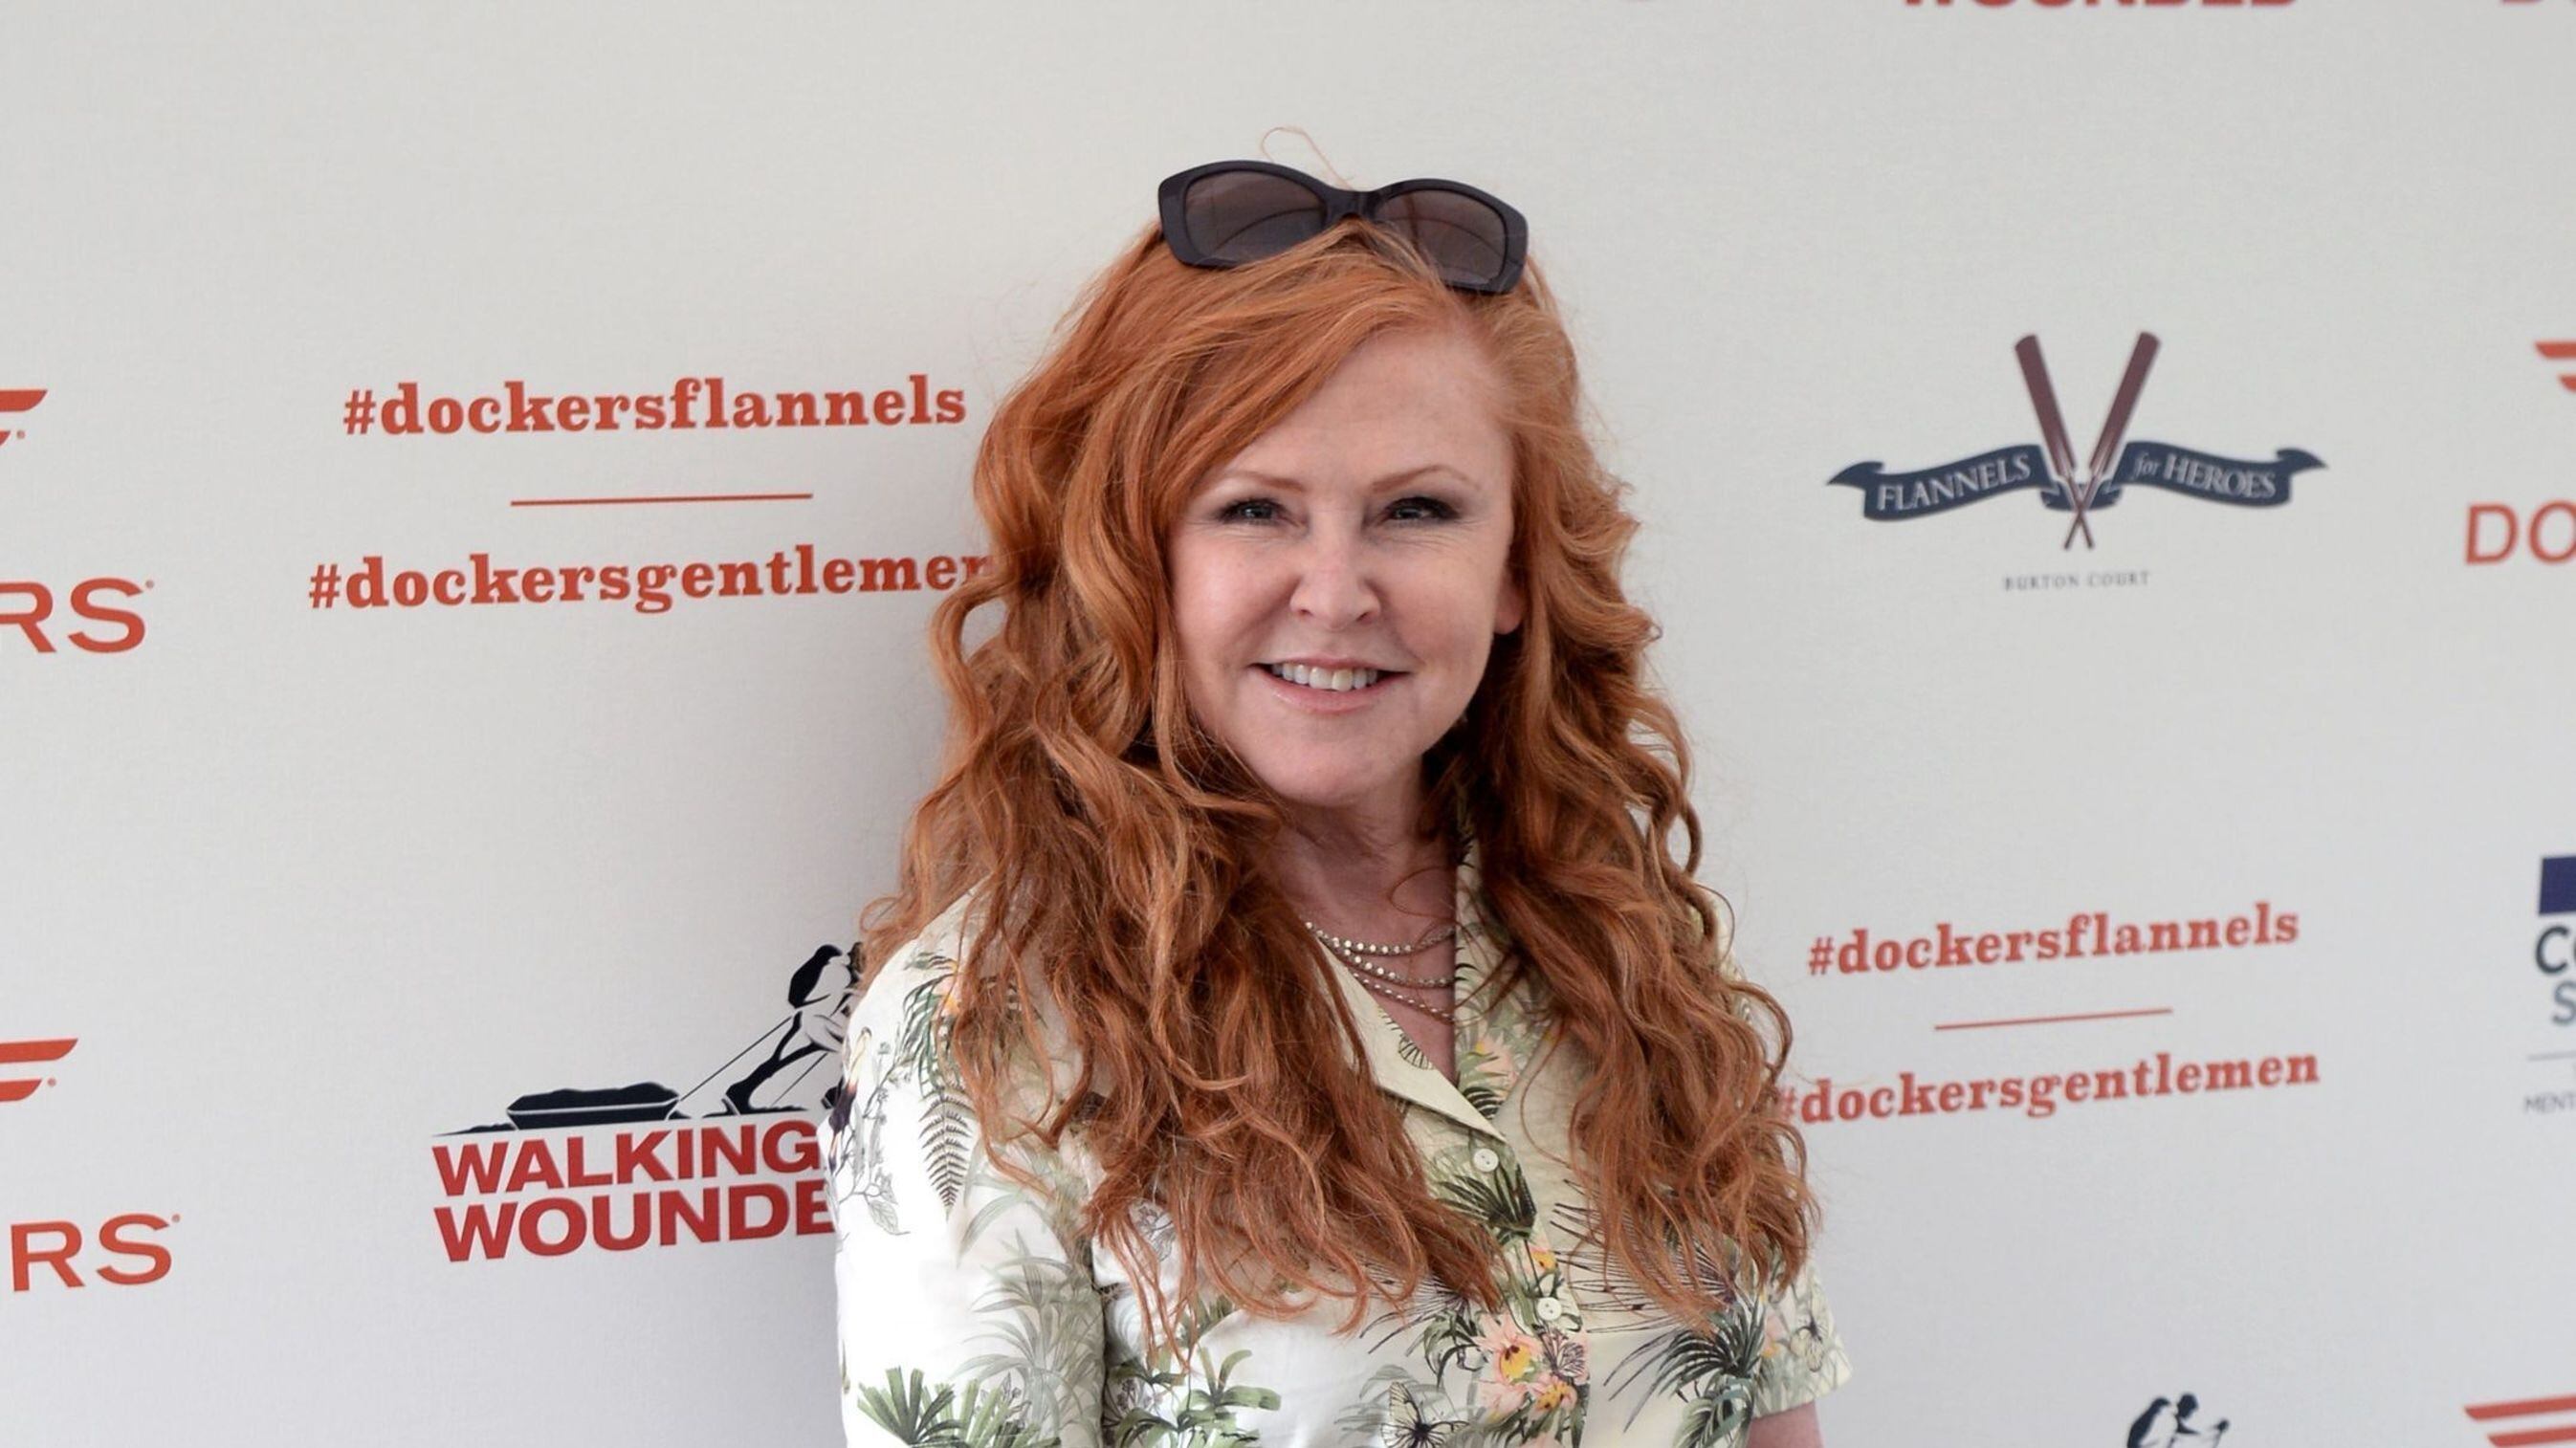 The T’Pau singer said society is more critical of people’s appearance these days.